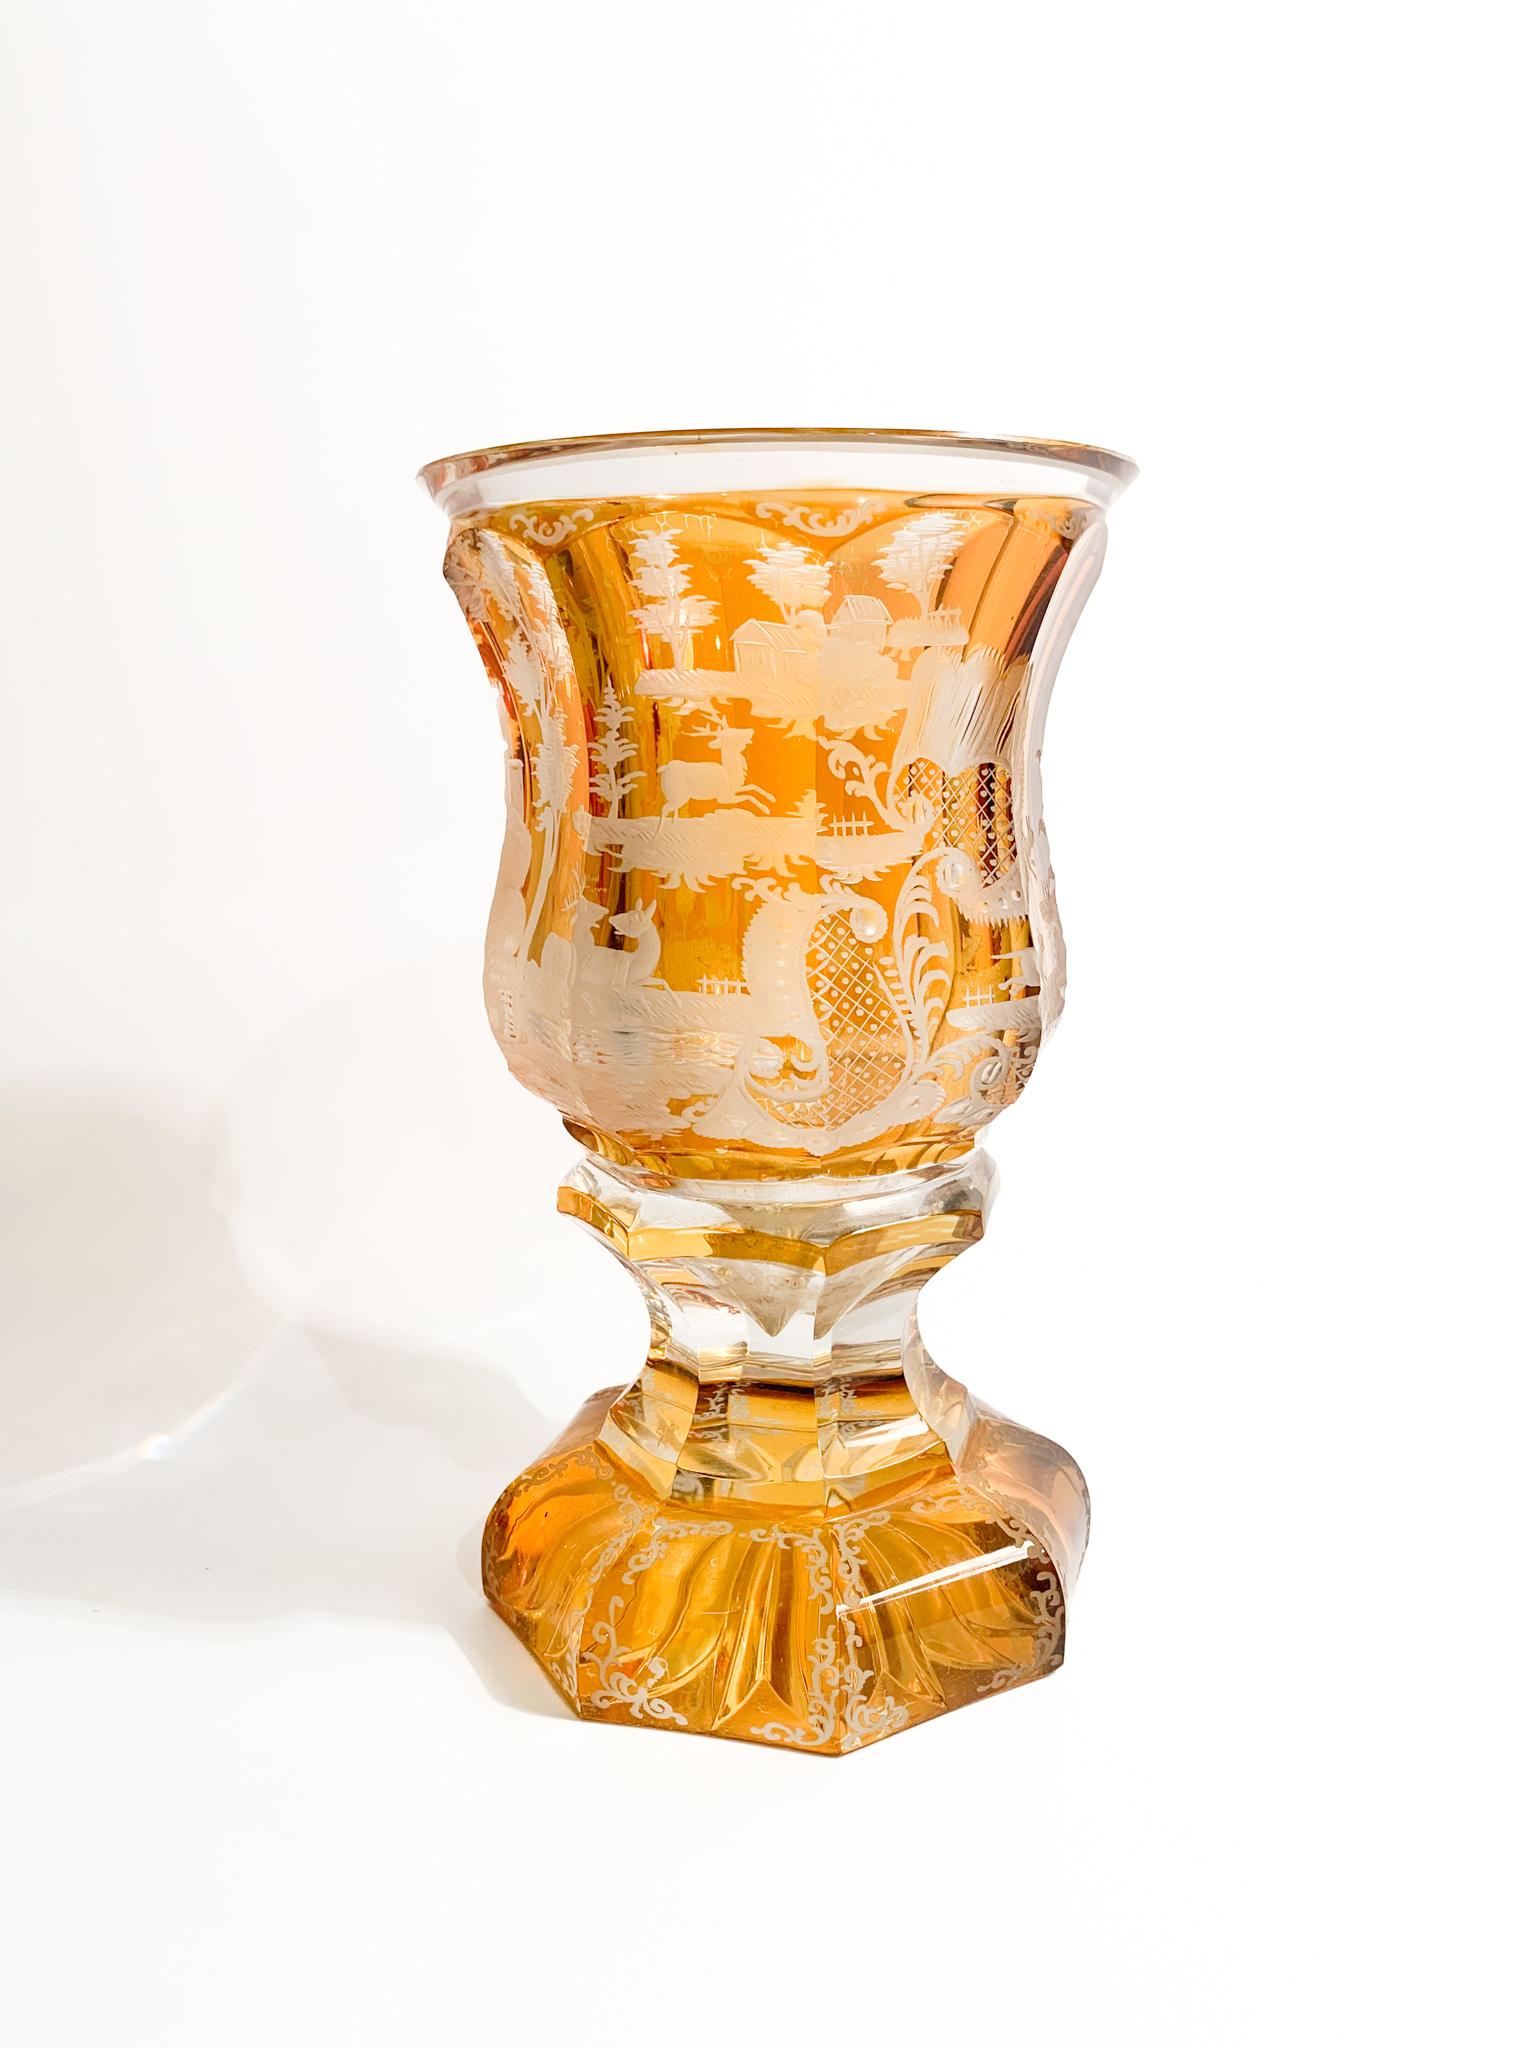 Yellow Biedermeier crystal glass, acid decorated and made in 1800

Ø cm 10 h cm 17,5

Biedermeier is was an artistic movement that developed between 1815 and 1848. The term initially spread as a derogatory term. Consisting of two words: the